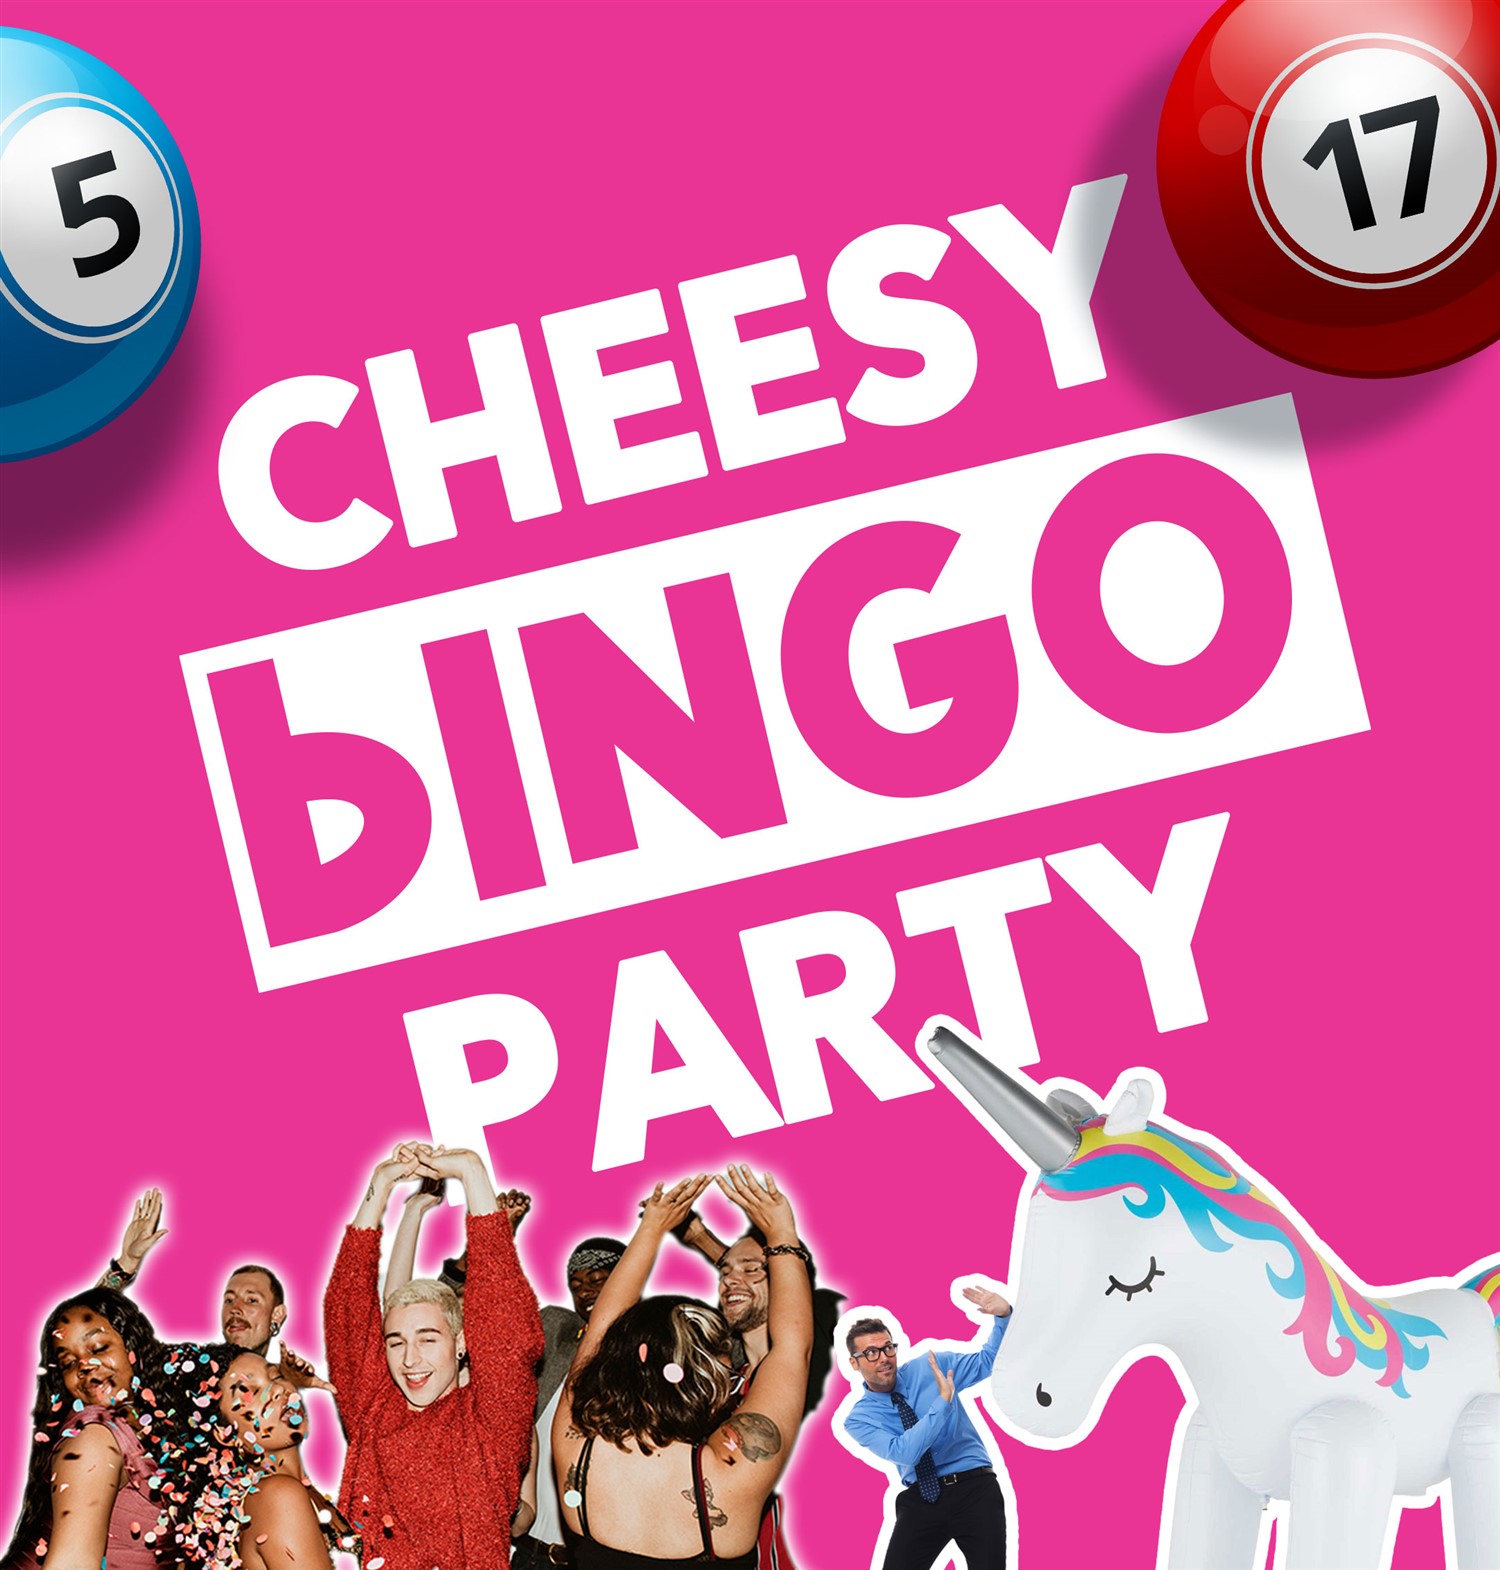 Cheesy Bingo Party Cheesy Bingo on Jul 12, 19:30@Sutton Coldfield Town Hall - Buy tickets and Get information on Sutton Coldfield Town Hall 